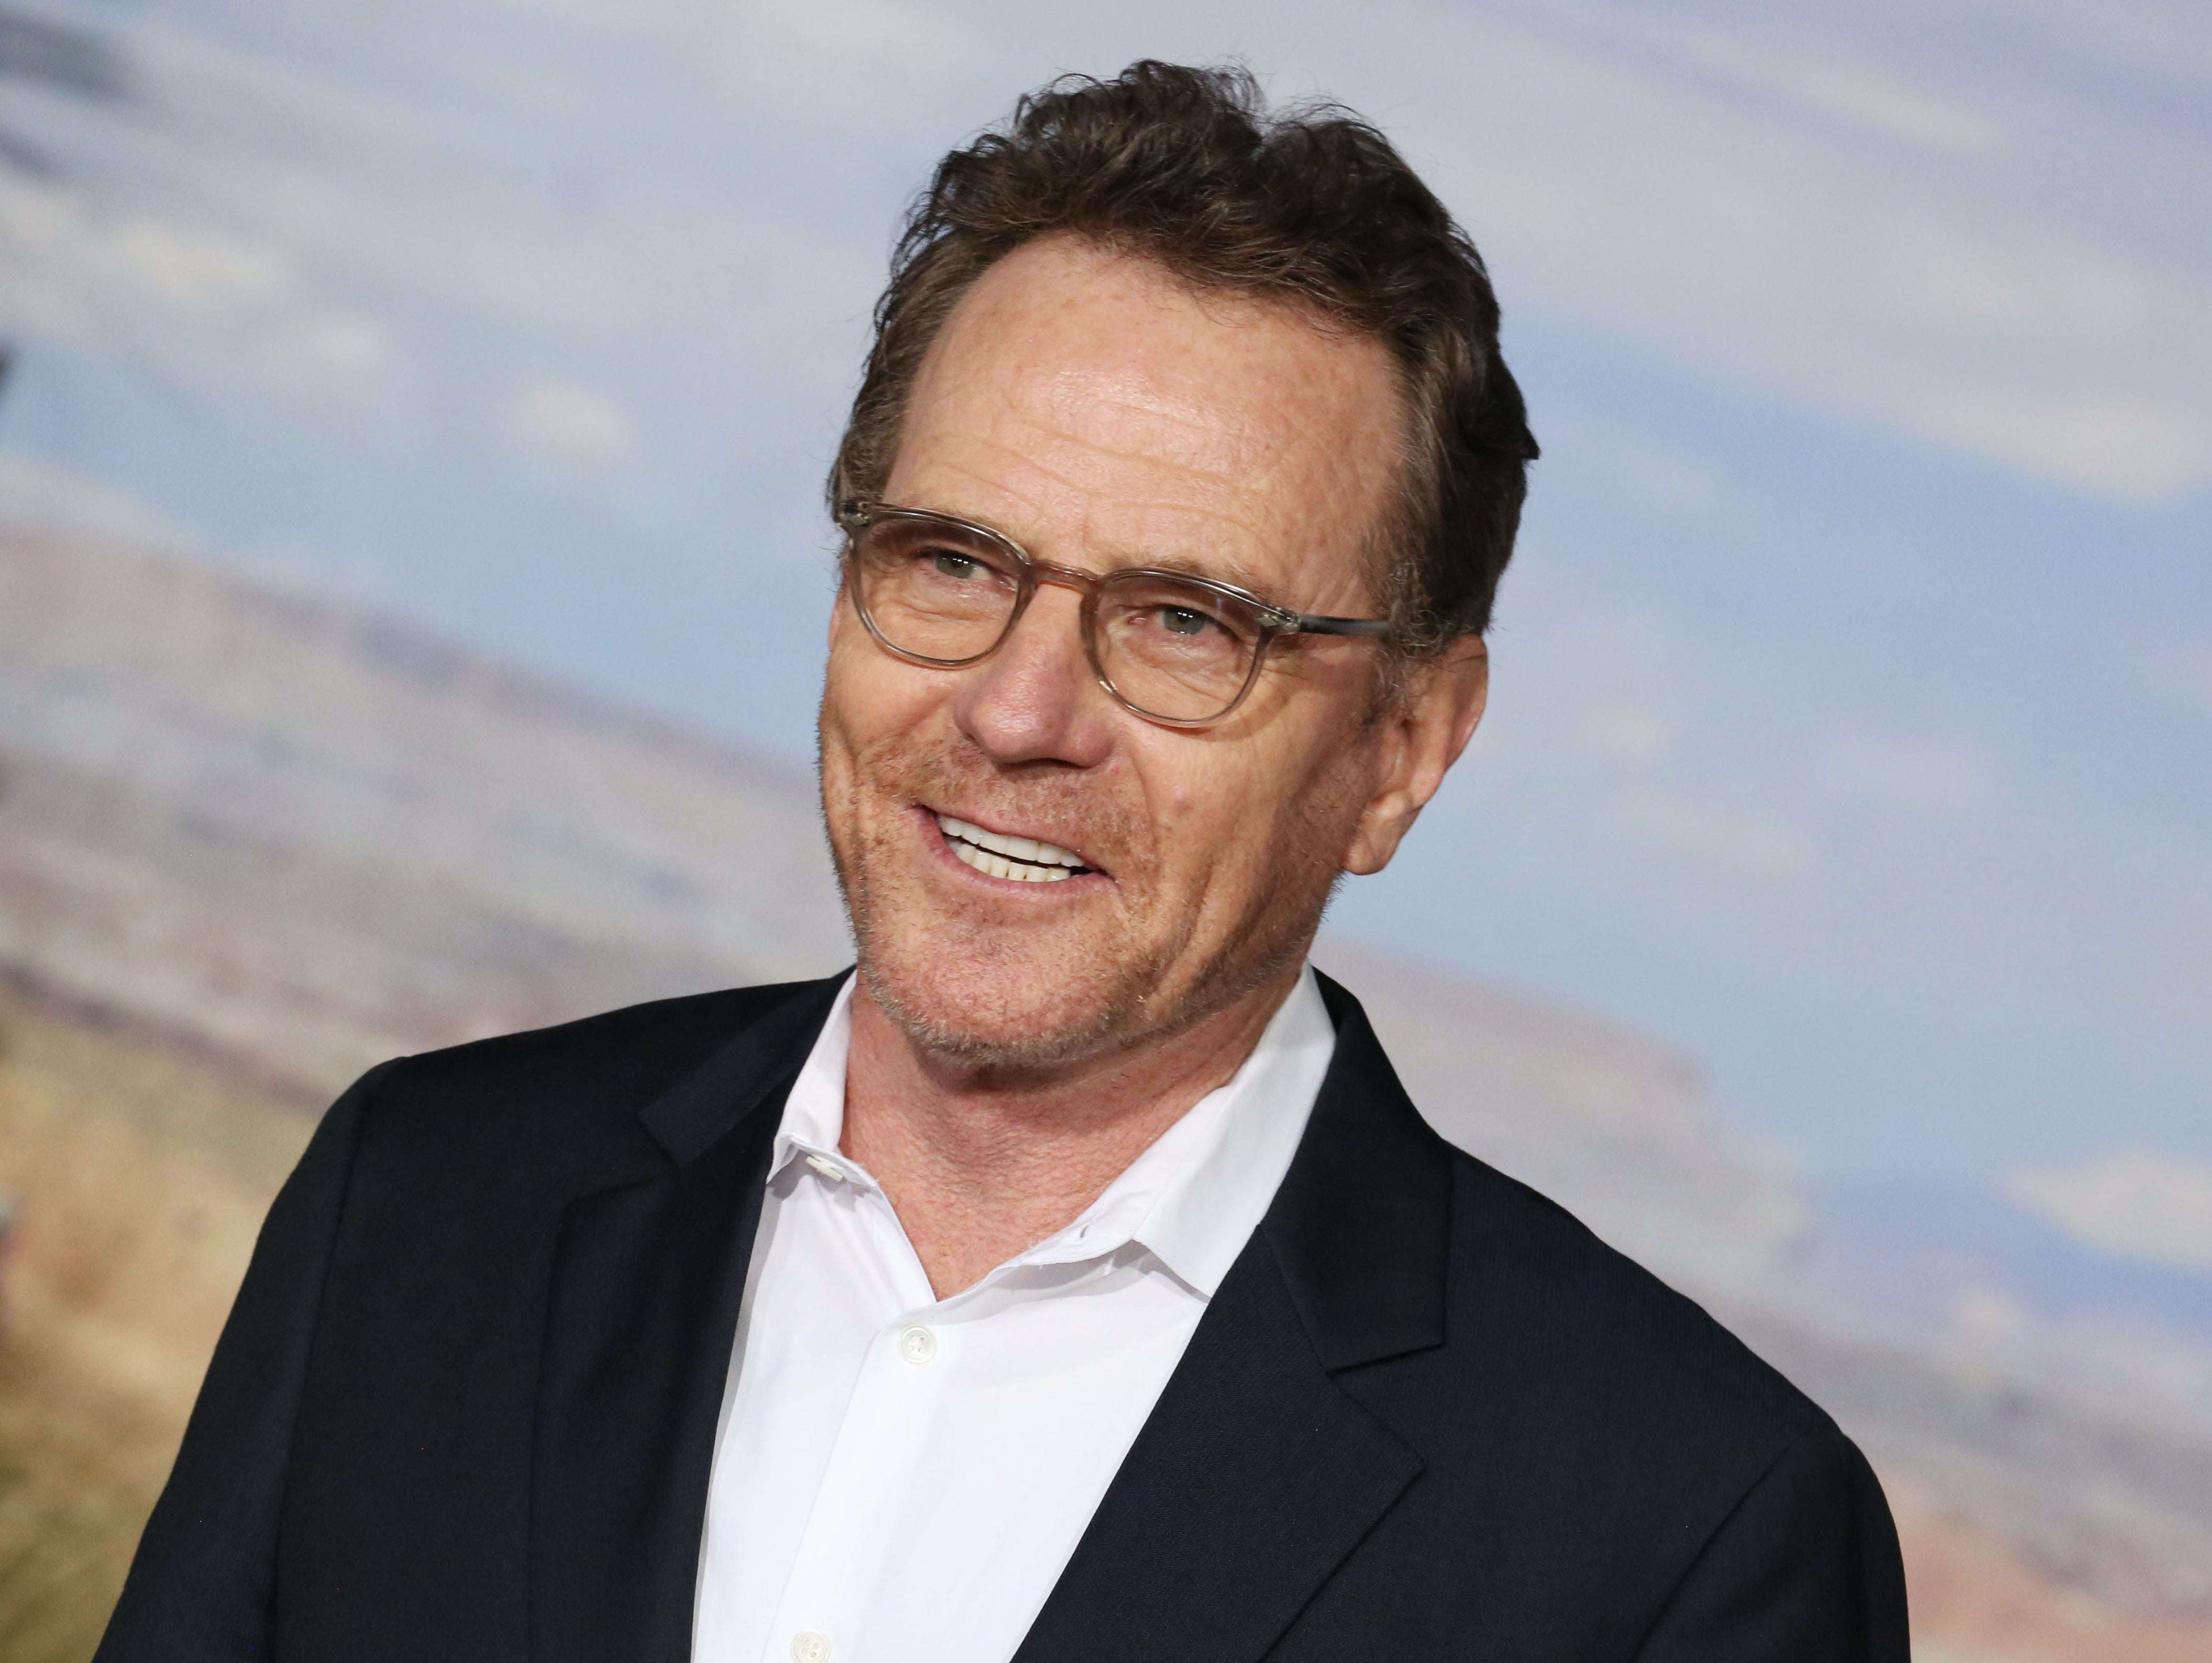 image for Bryan Cranston says he still hasn’t recovered sense of taste or smell after coronavirus infection